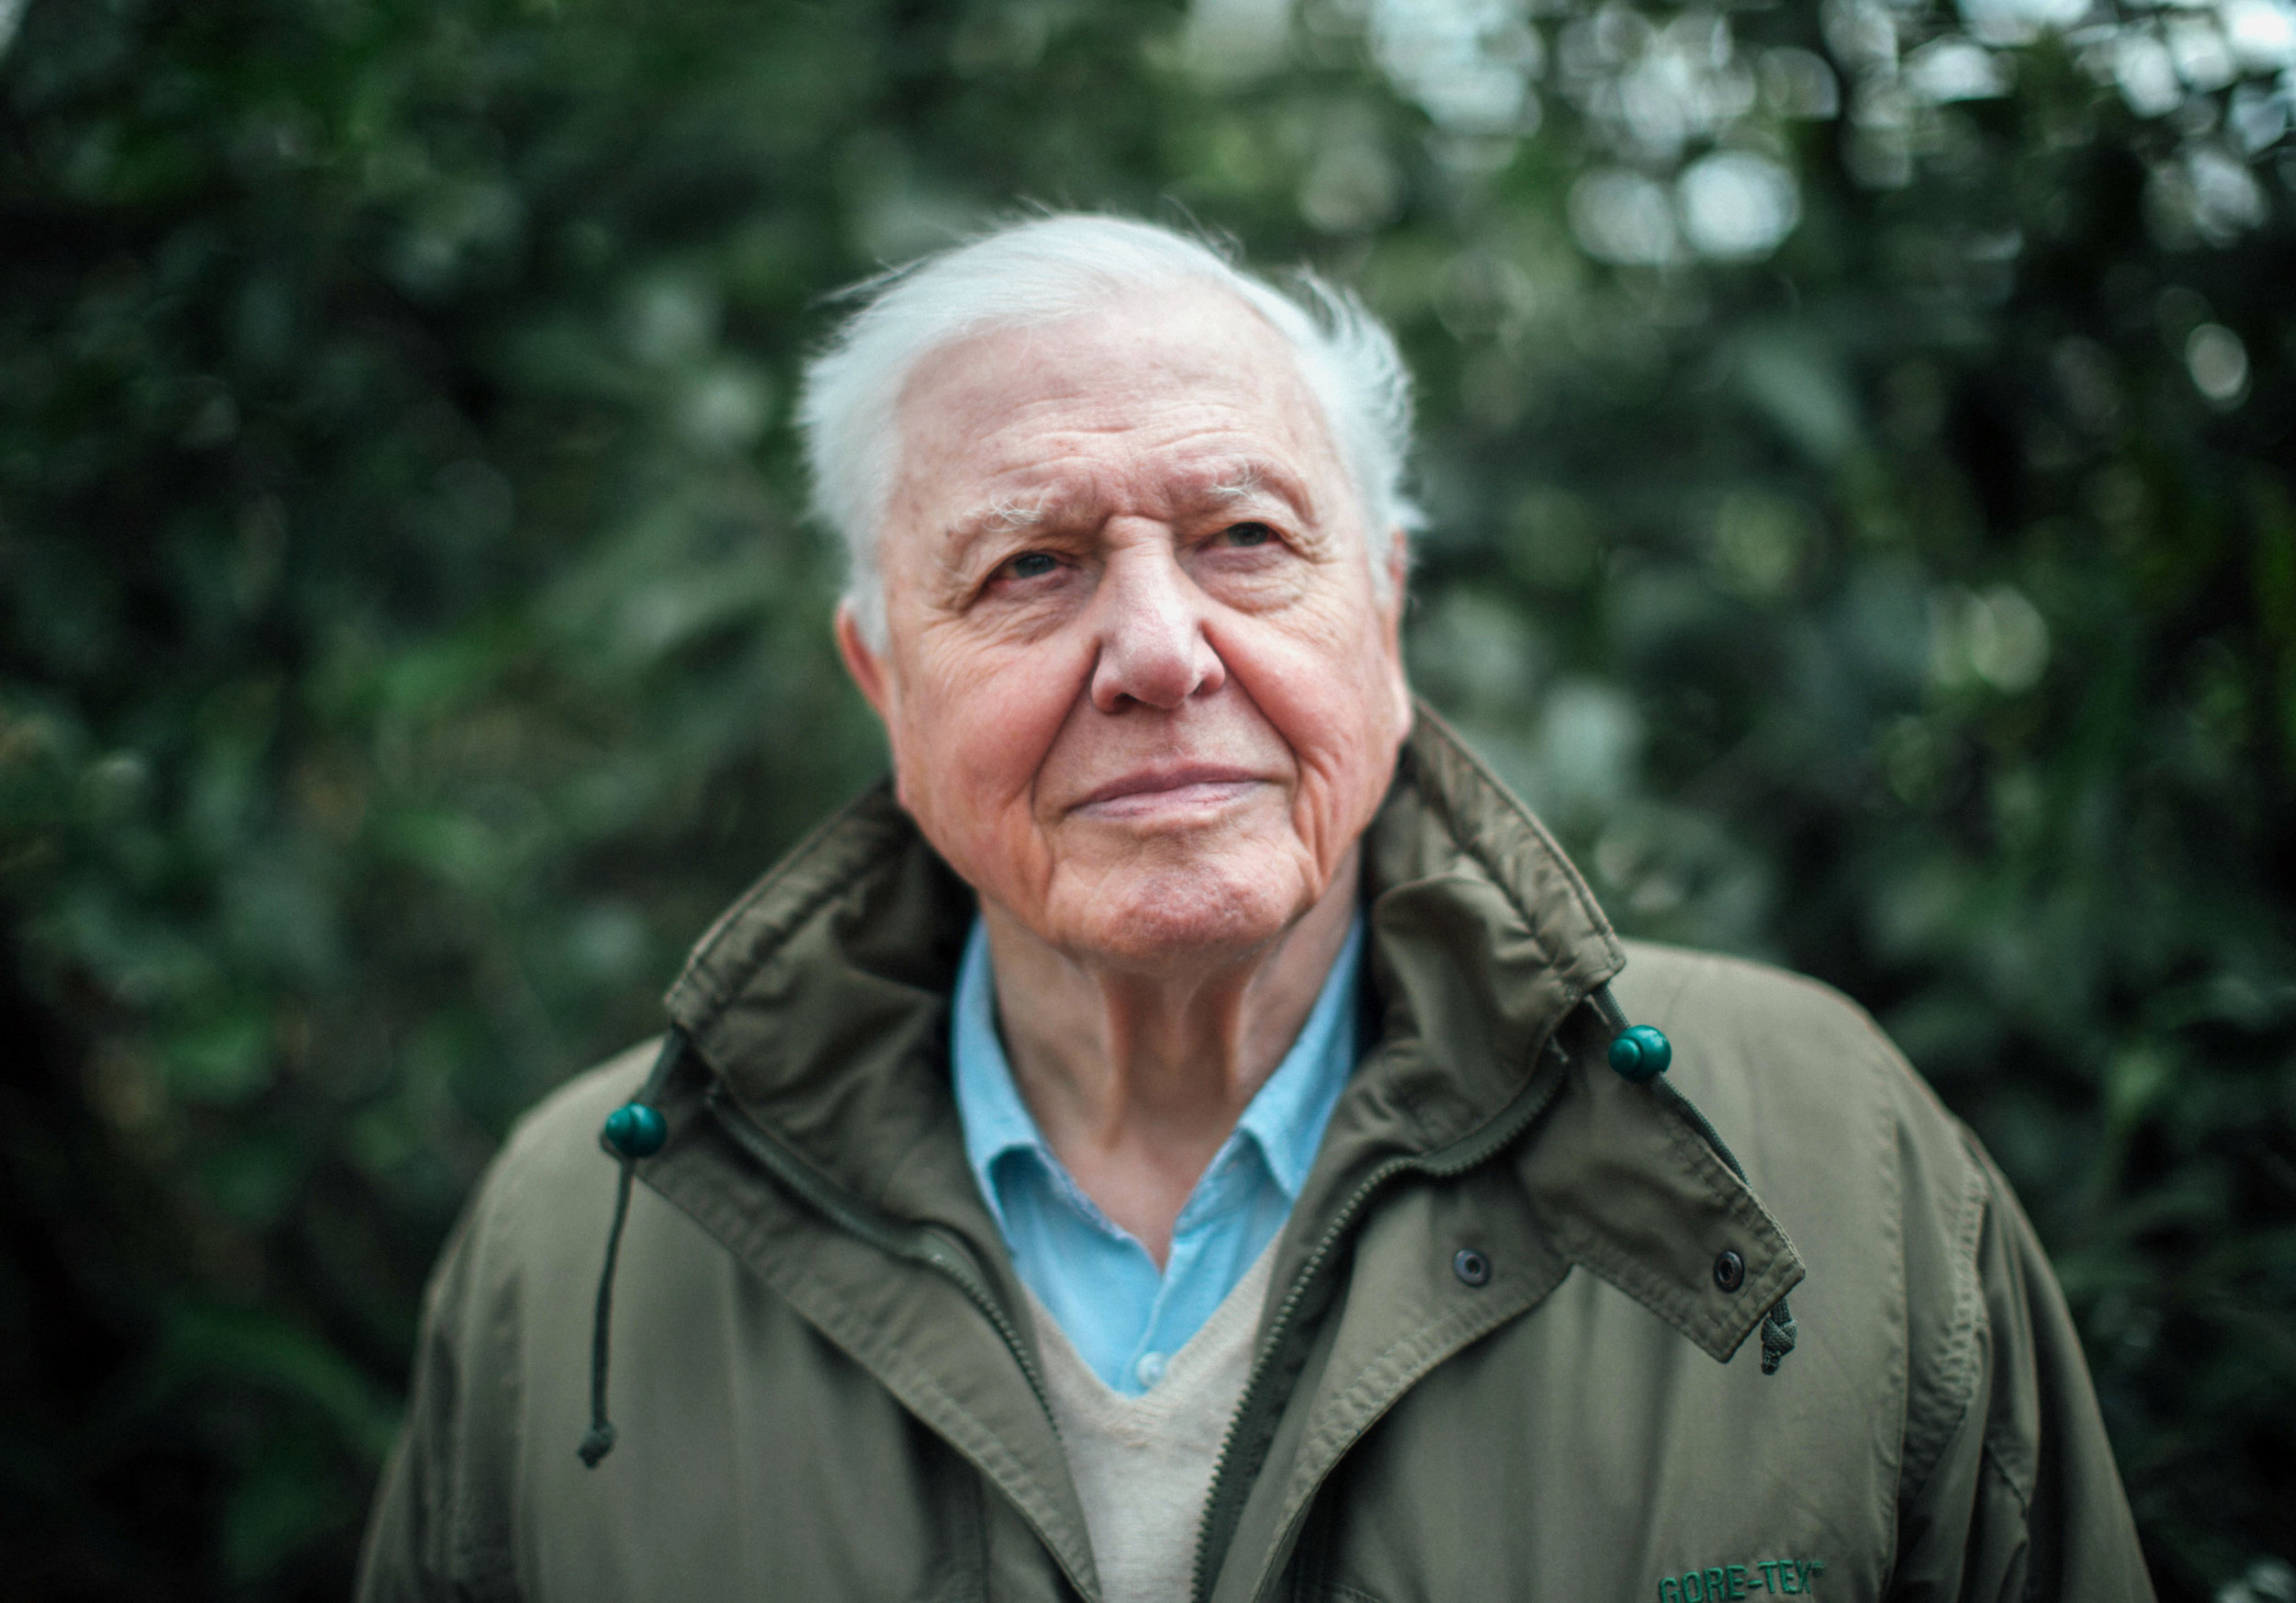   Climate Change: The facts with Sir David Attenborough  Image - ABC 